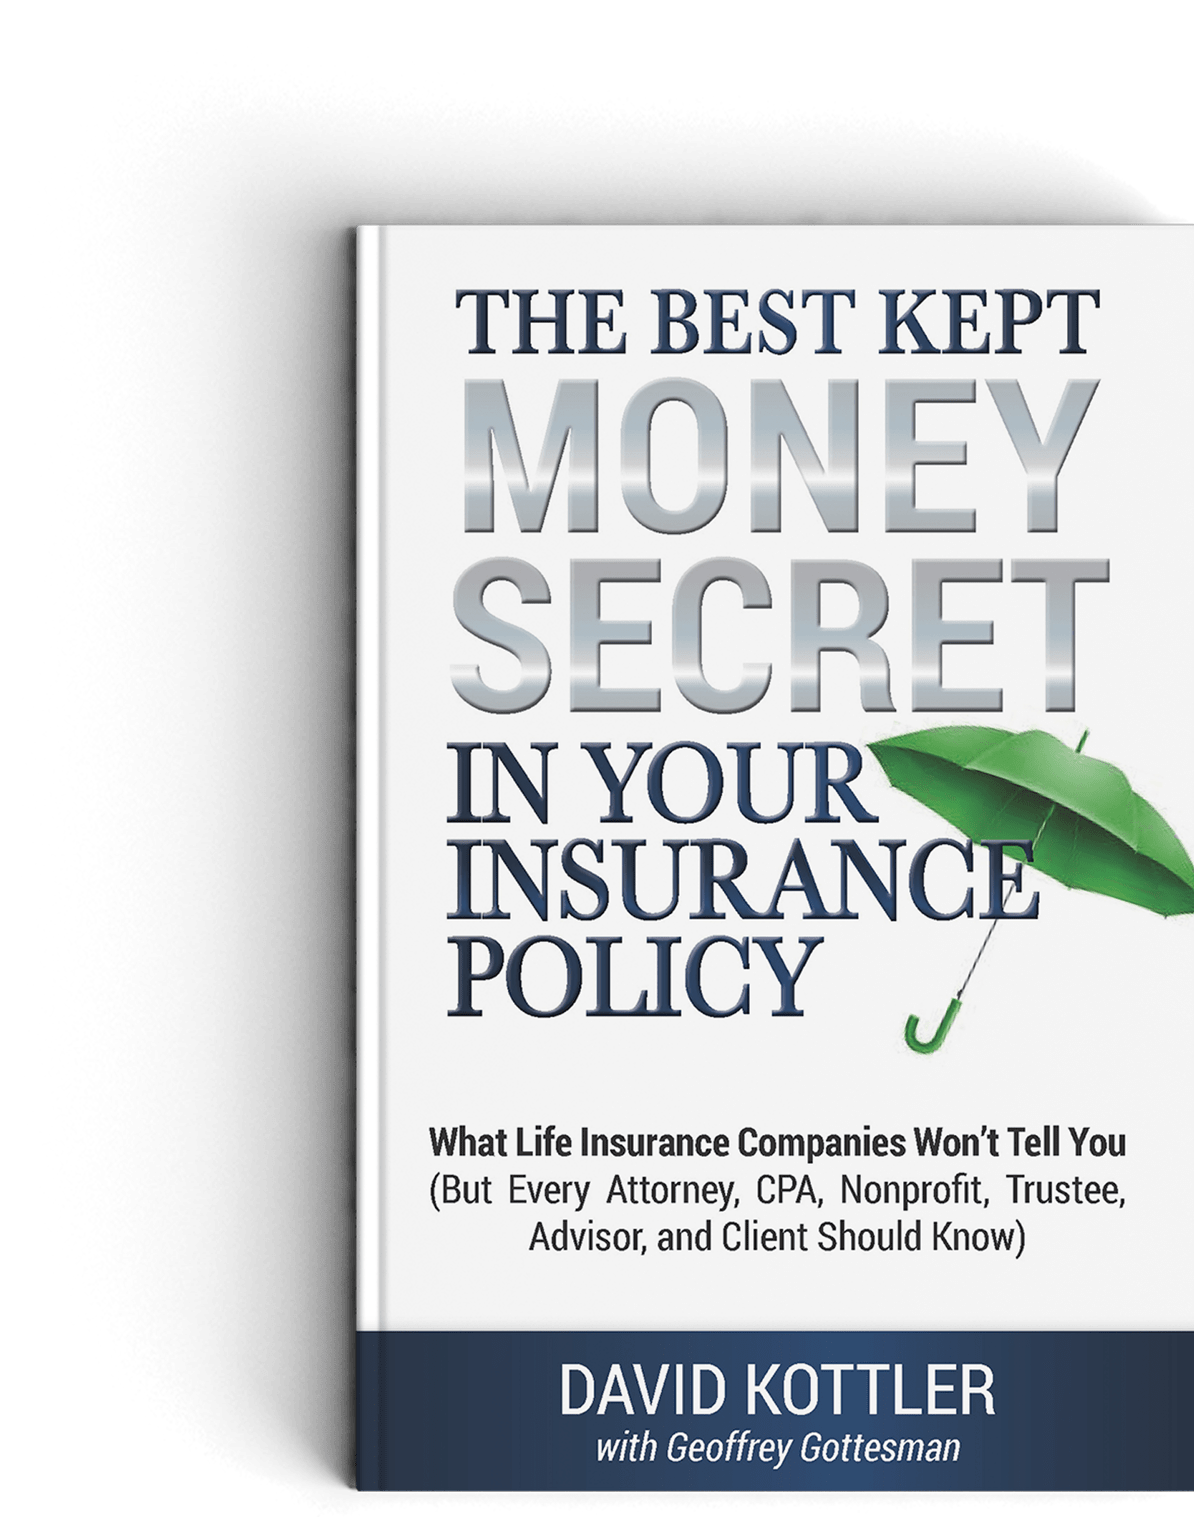 The Best Kept Money Secret in Your Insurance Policy